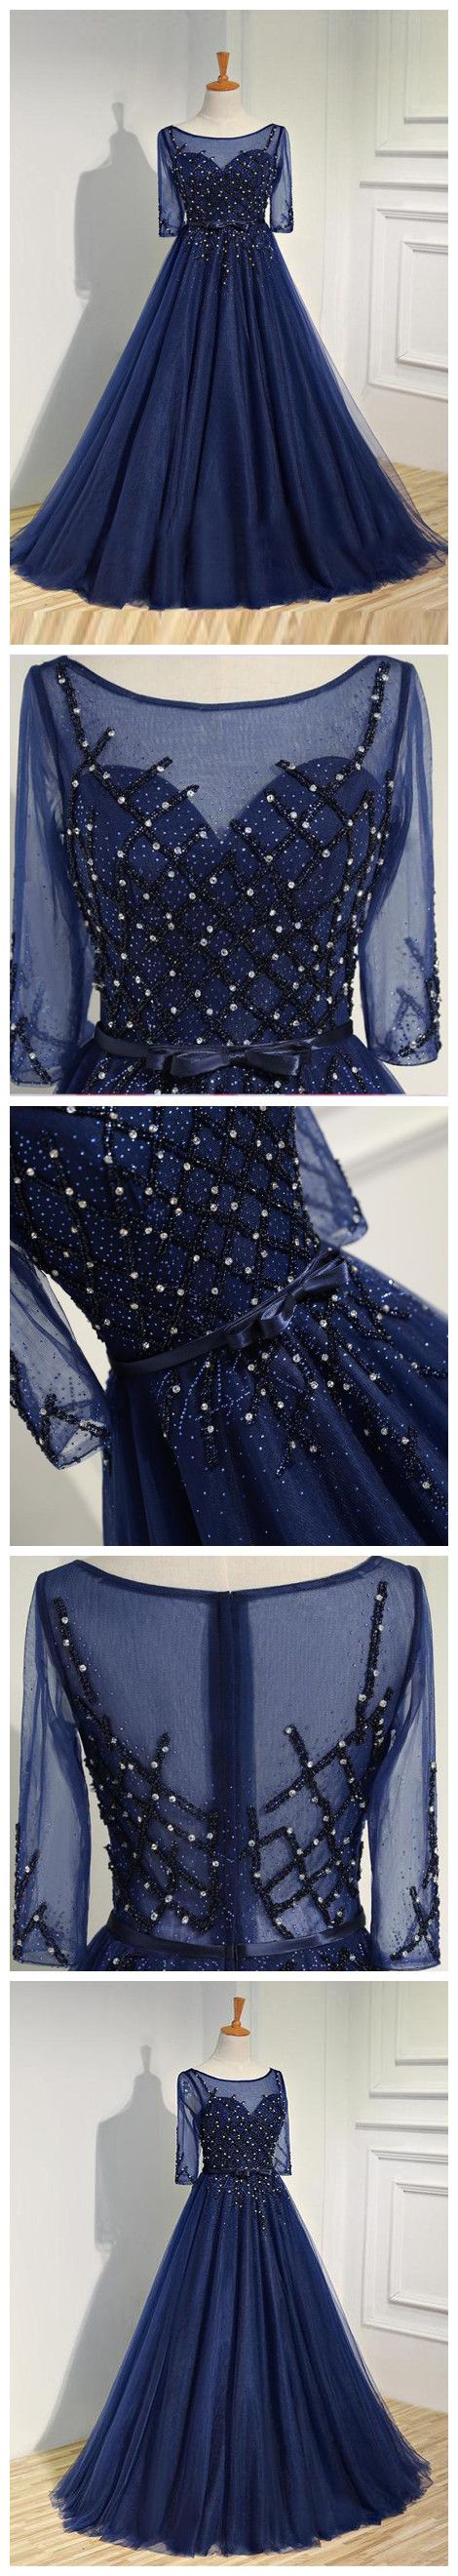 Prom Dresses A Line,prom Dresses Long,prom Dresses With Sleeves,gorgeous Prom Dresses,prom Dresses Navy,pd 267